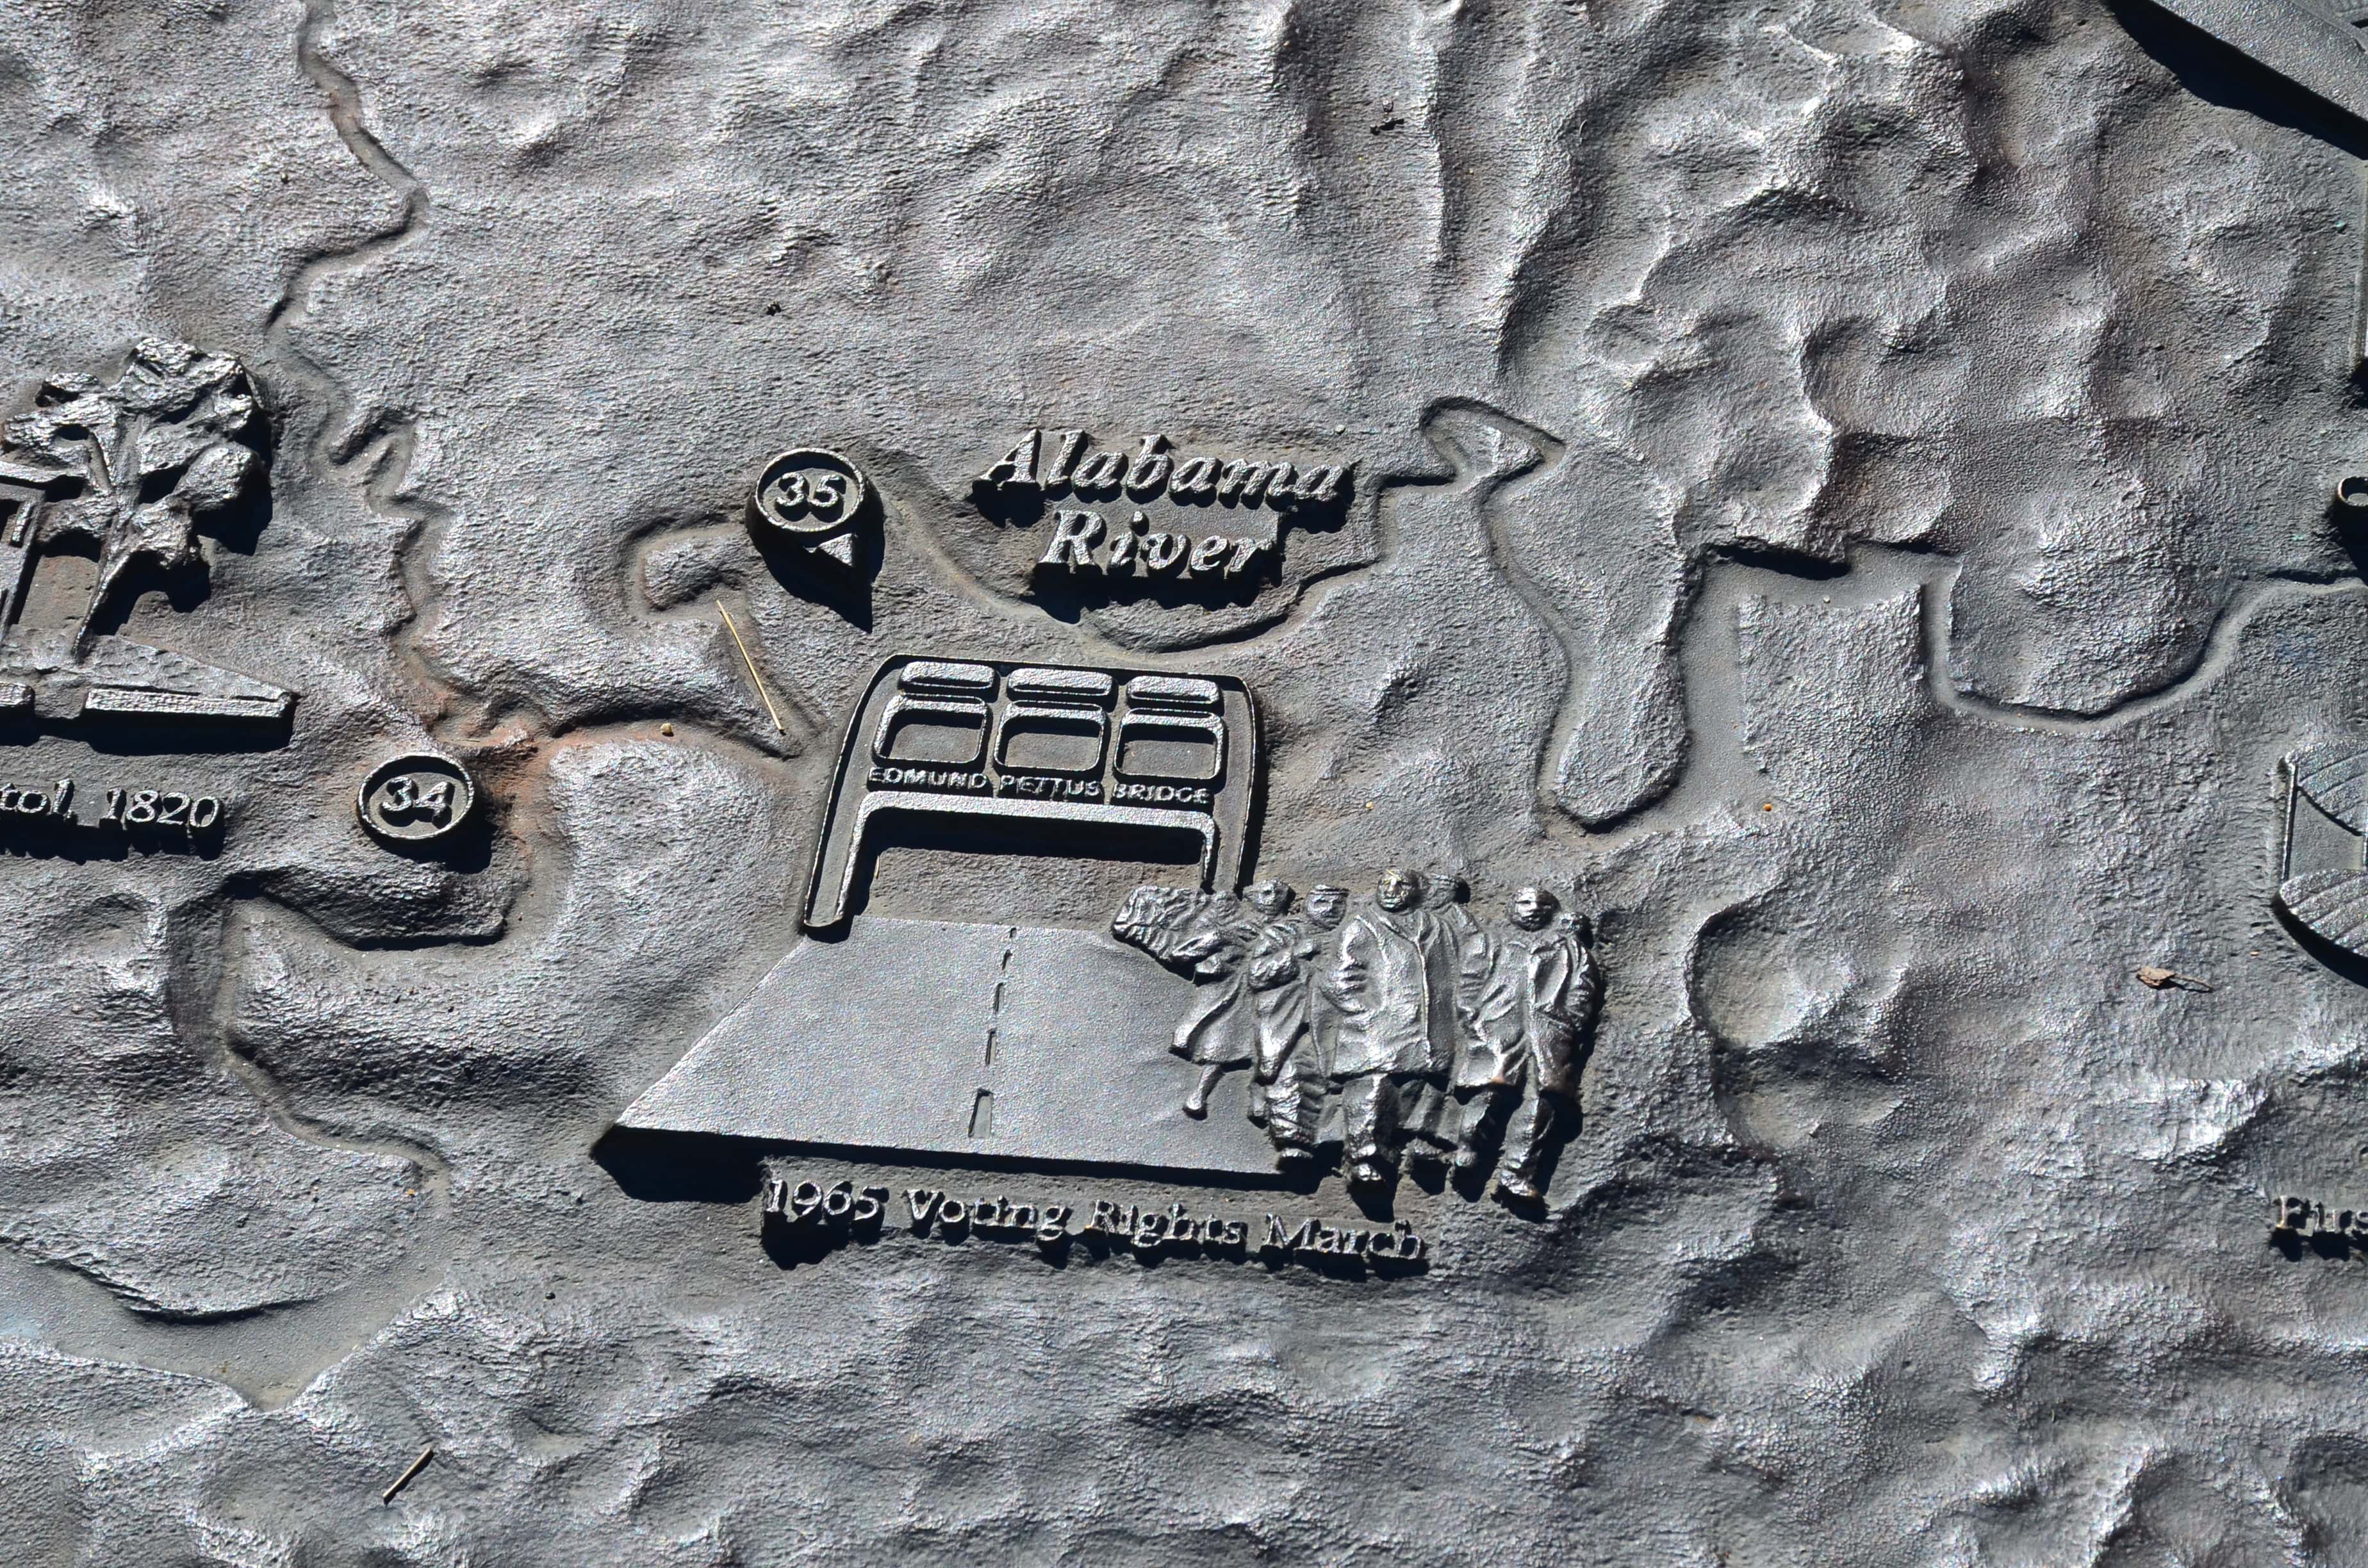 Selma on the Relief map of Alabama in Montgomery, Alabama